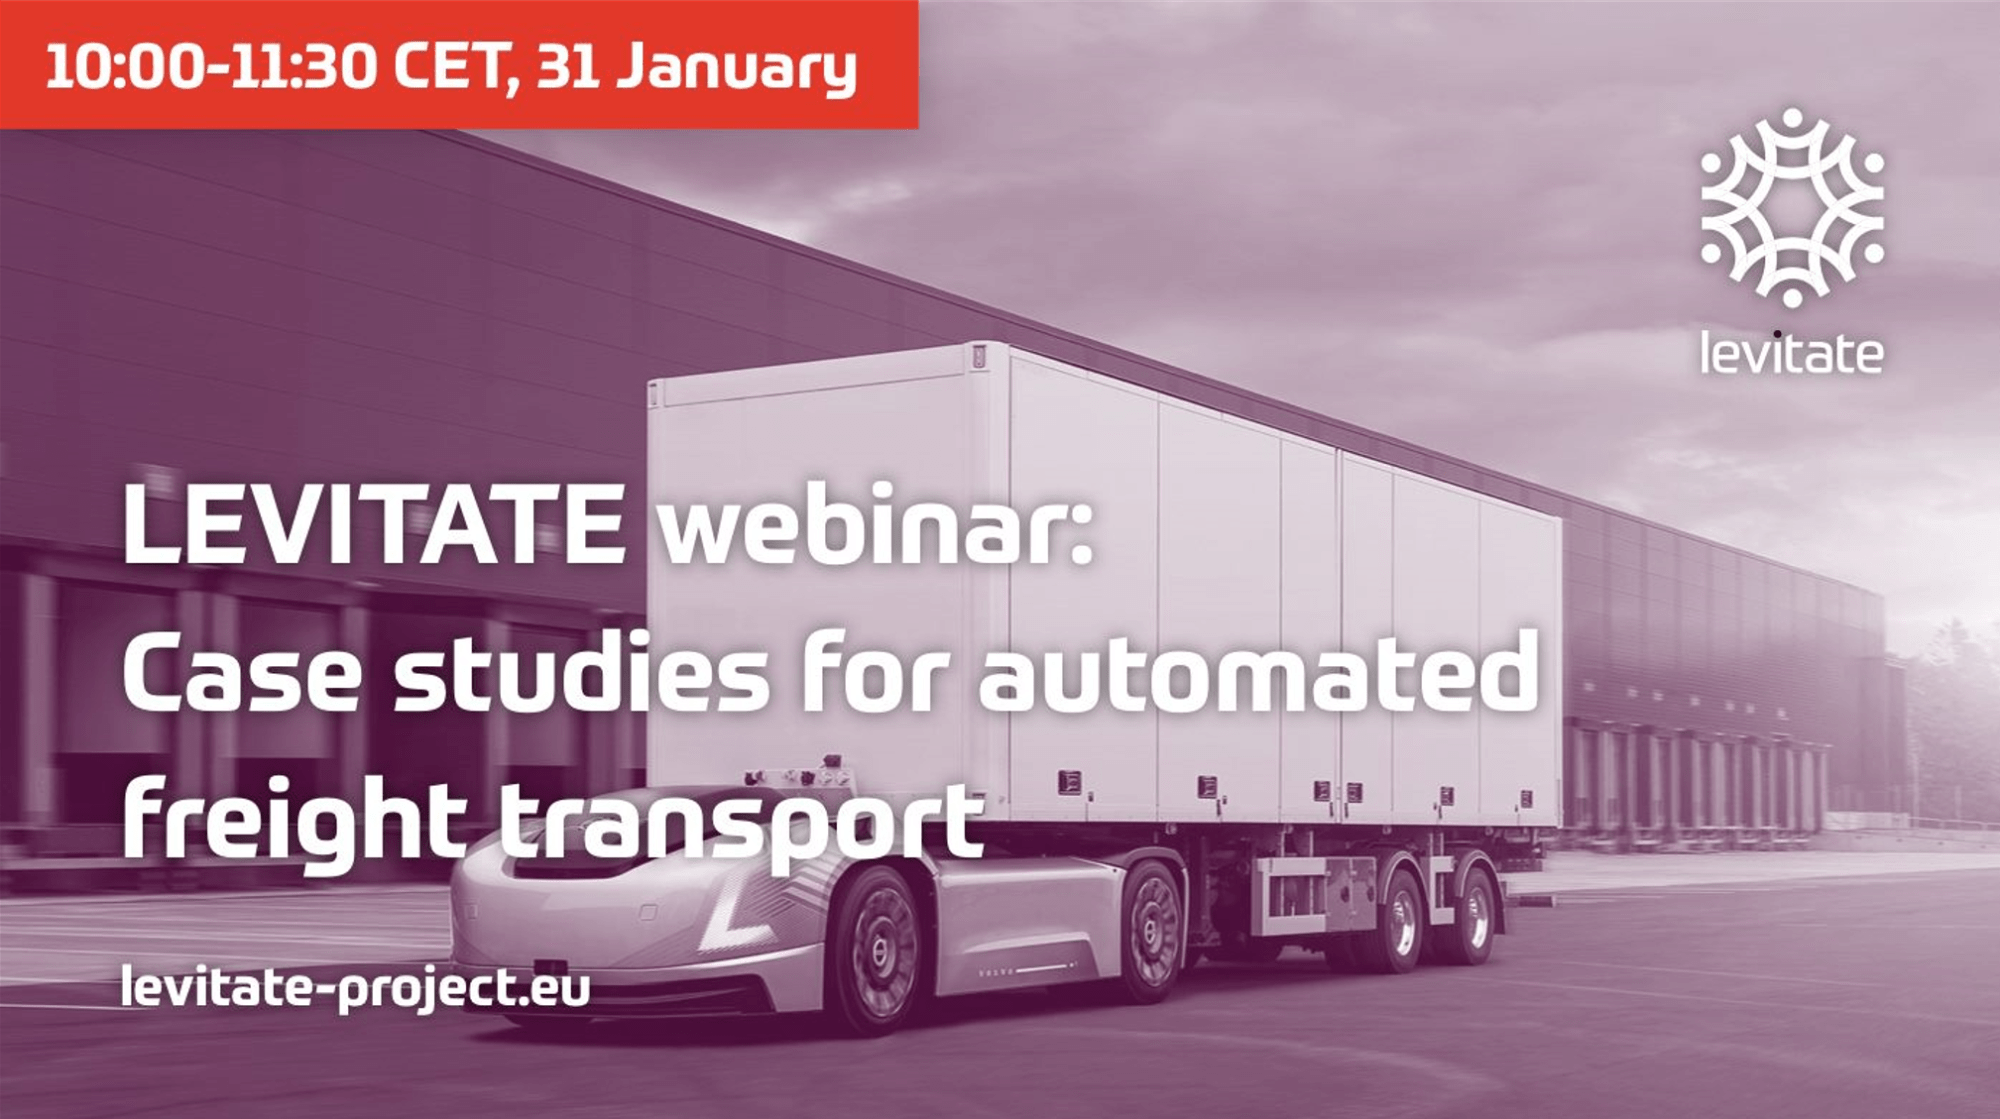 LEVITATE webinar: Case studies for automated freight transport